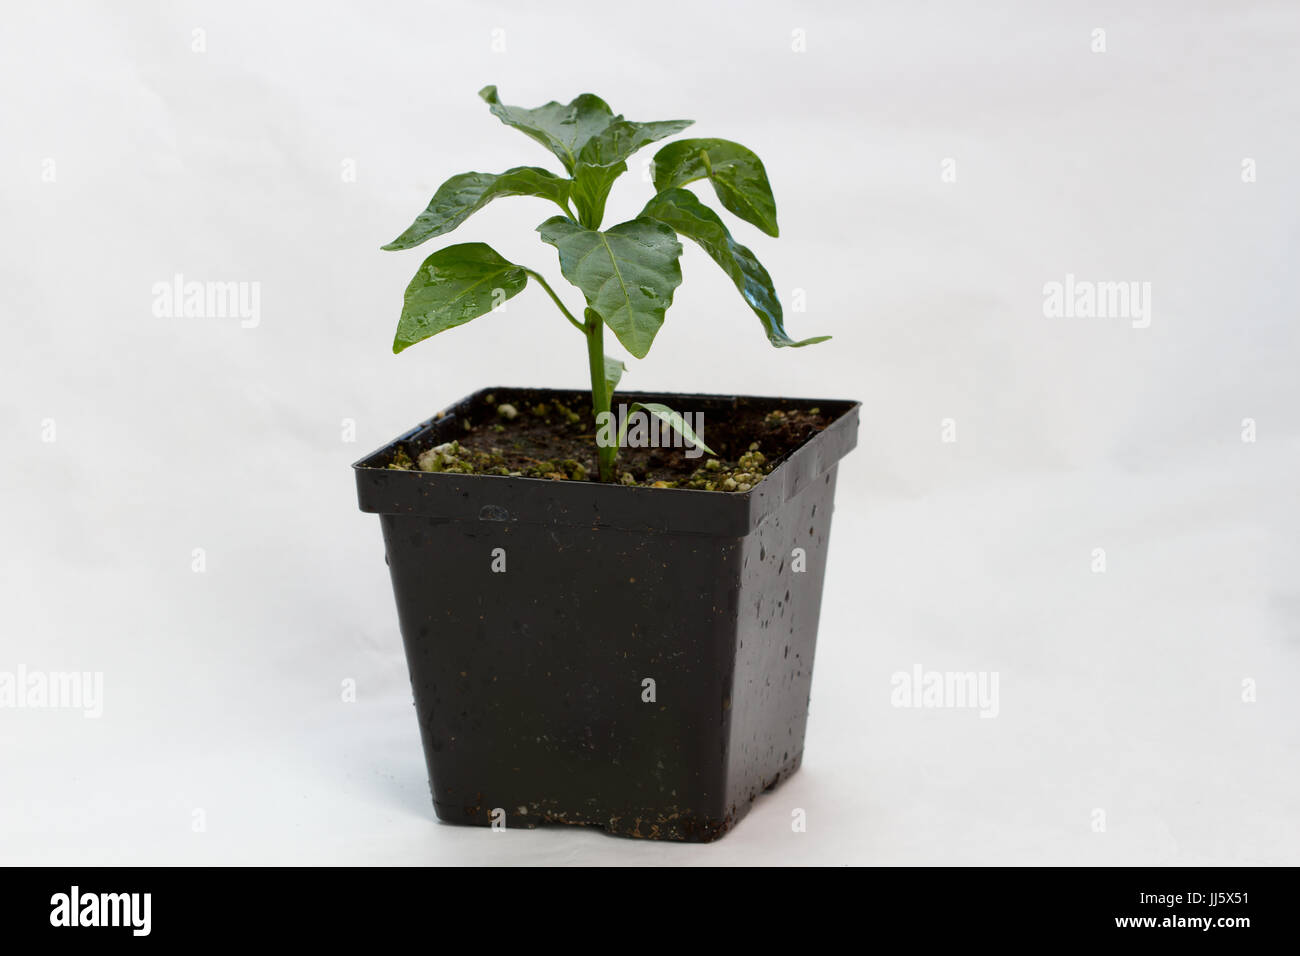 Vegetable seedlings in a nursery pot on white isolated background. Stock Photo